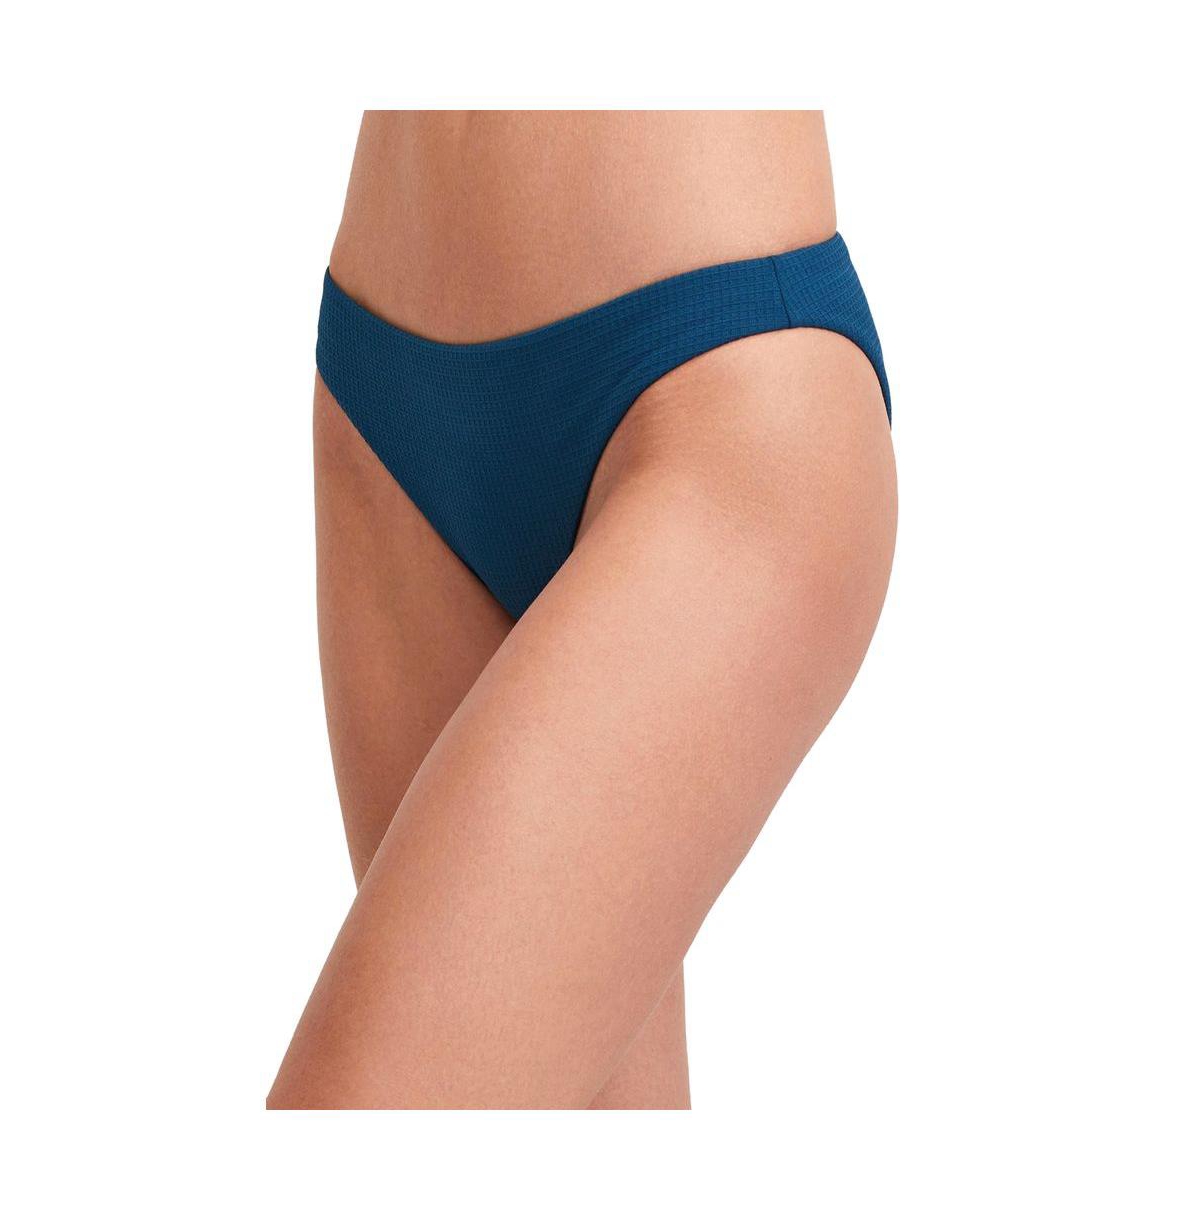 Women's Solid textured mid-rise swim bottom - Teal